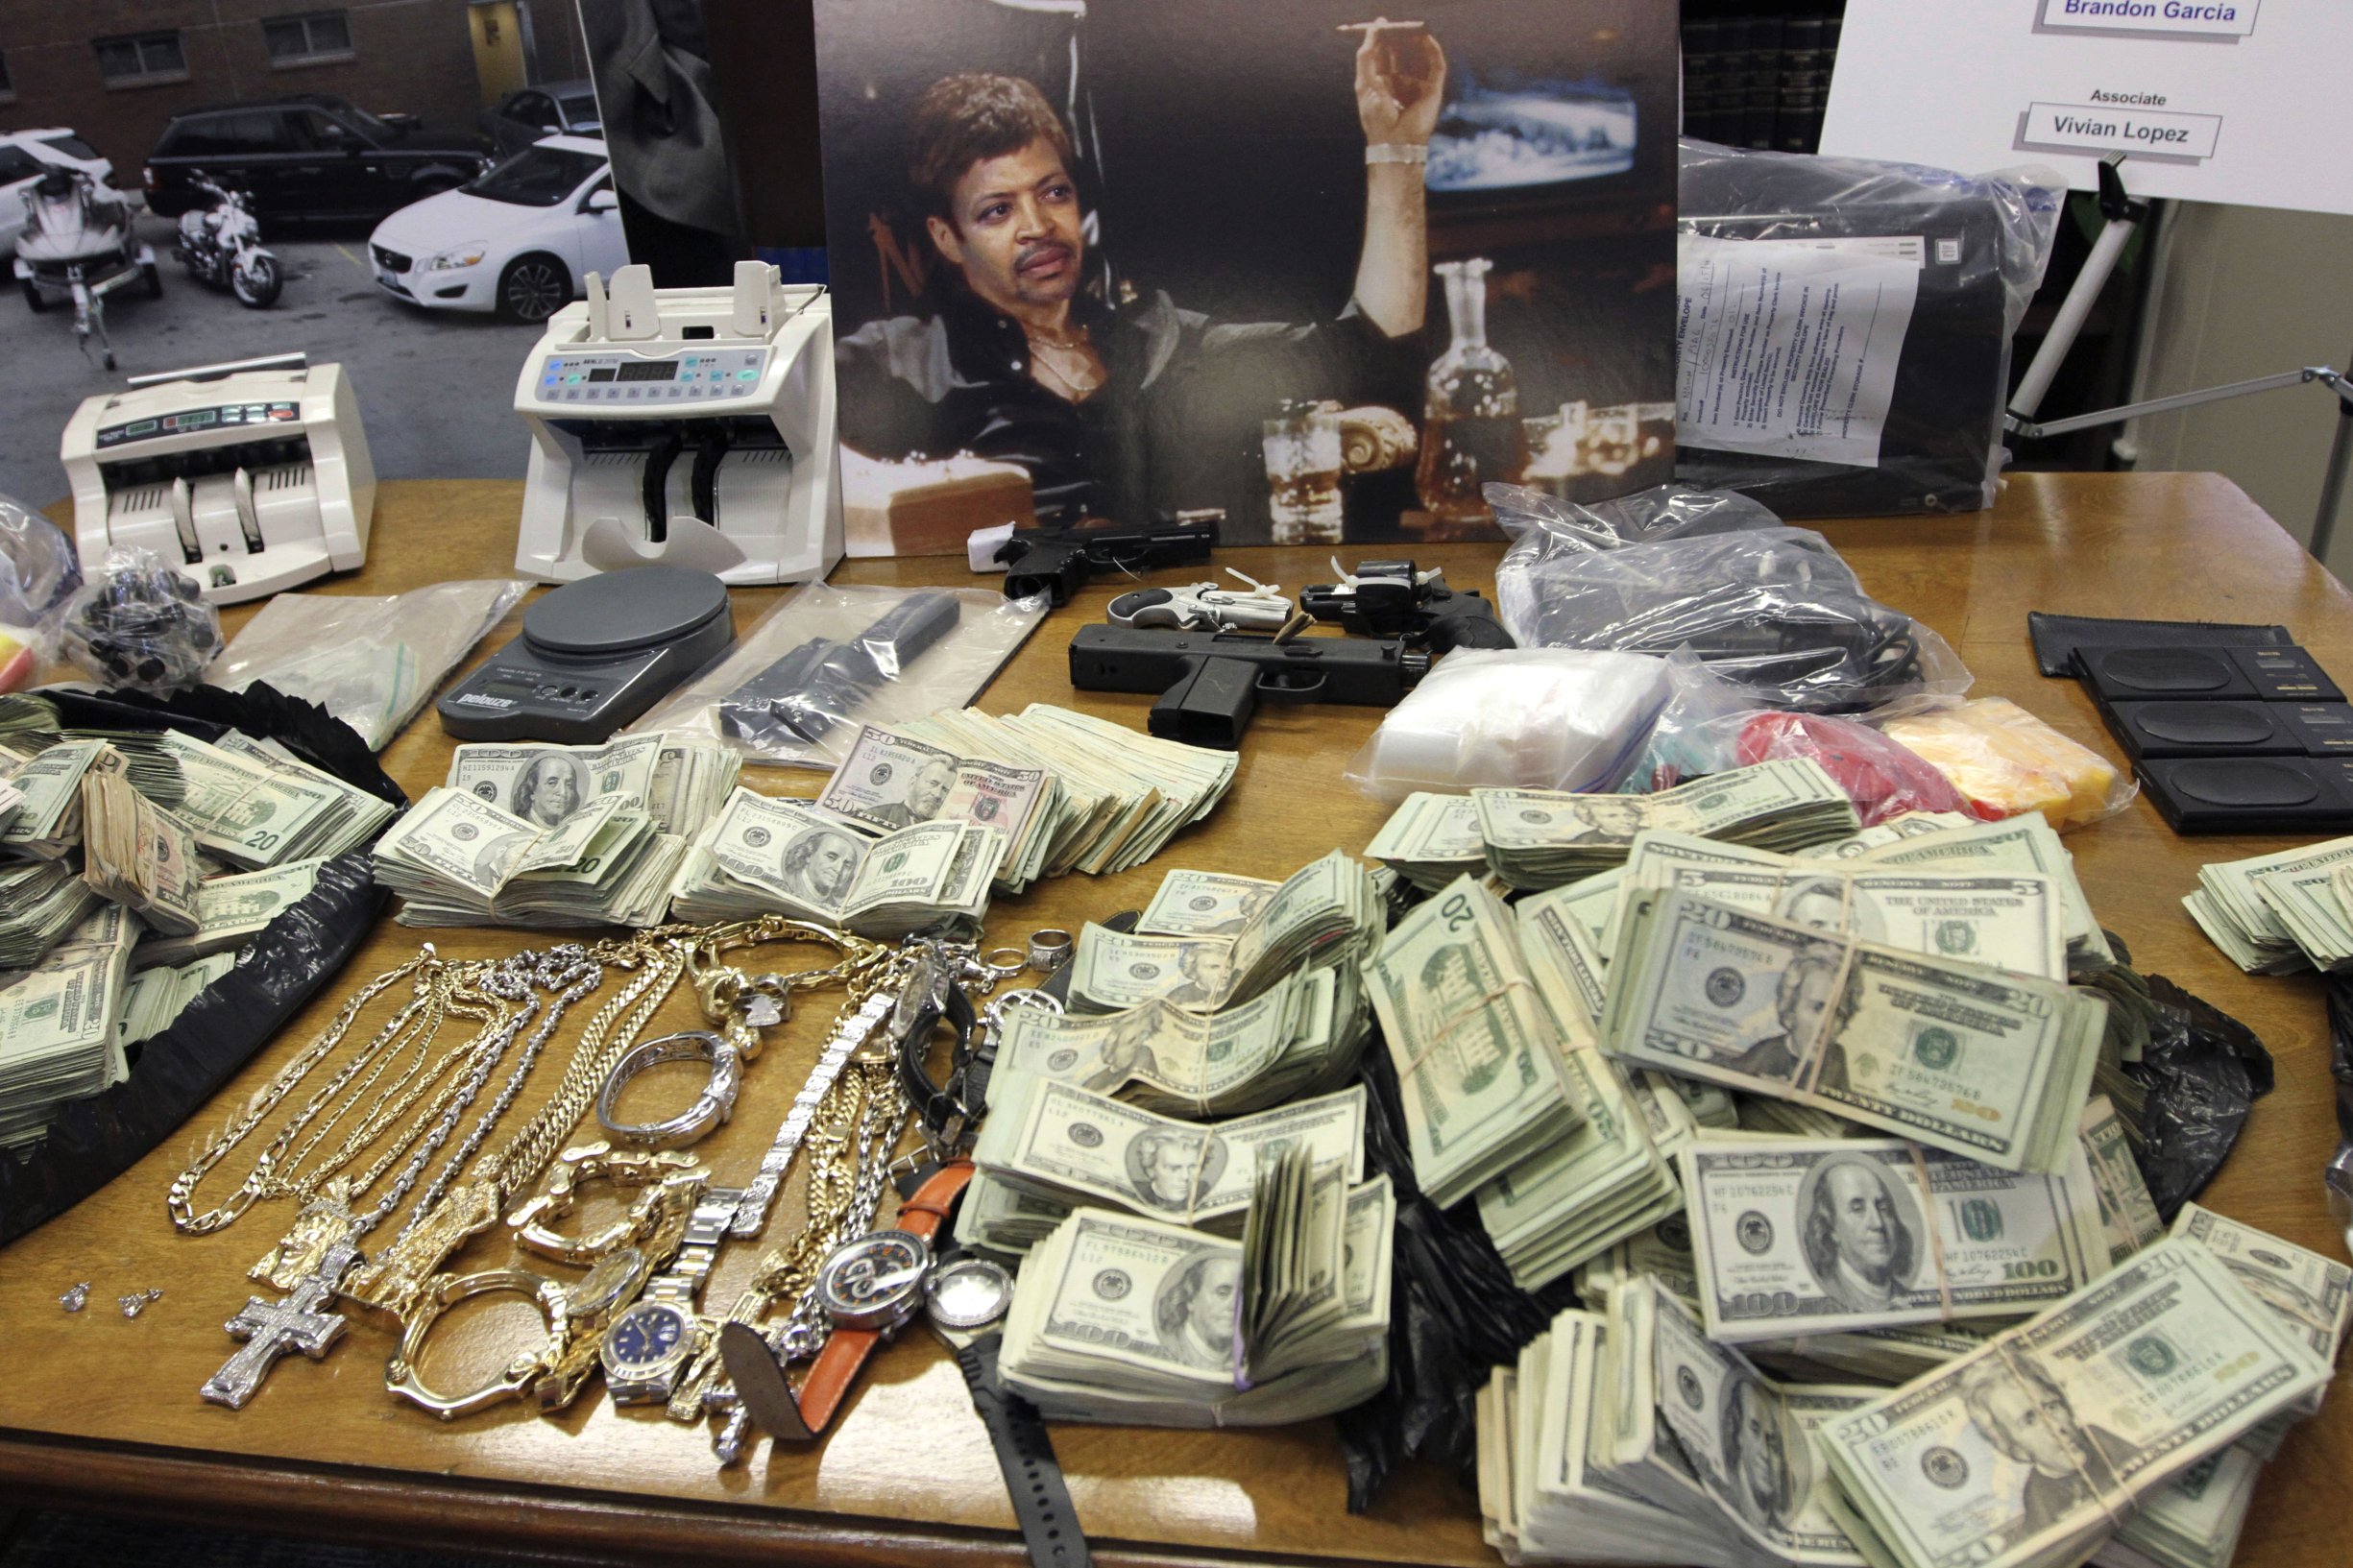 Loot of a captured Manhattan drug lord including a painting of himself as Scarface